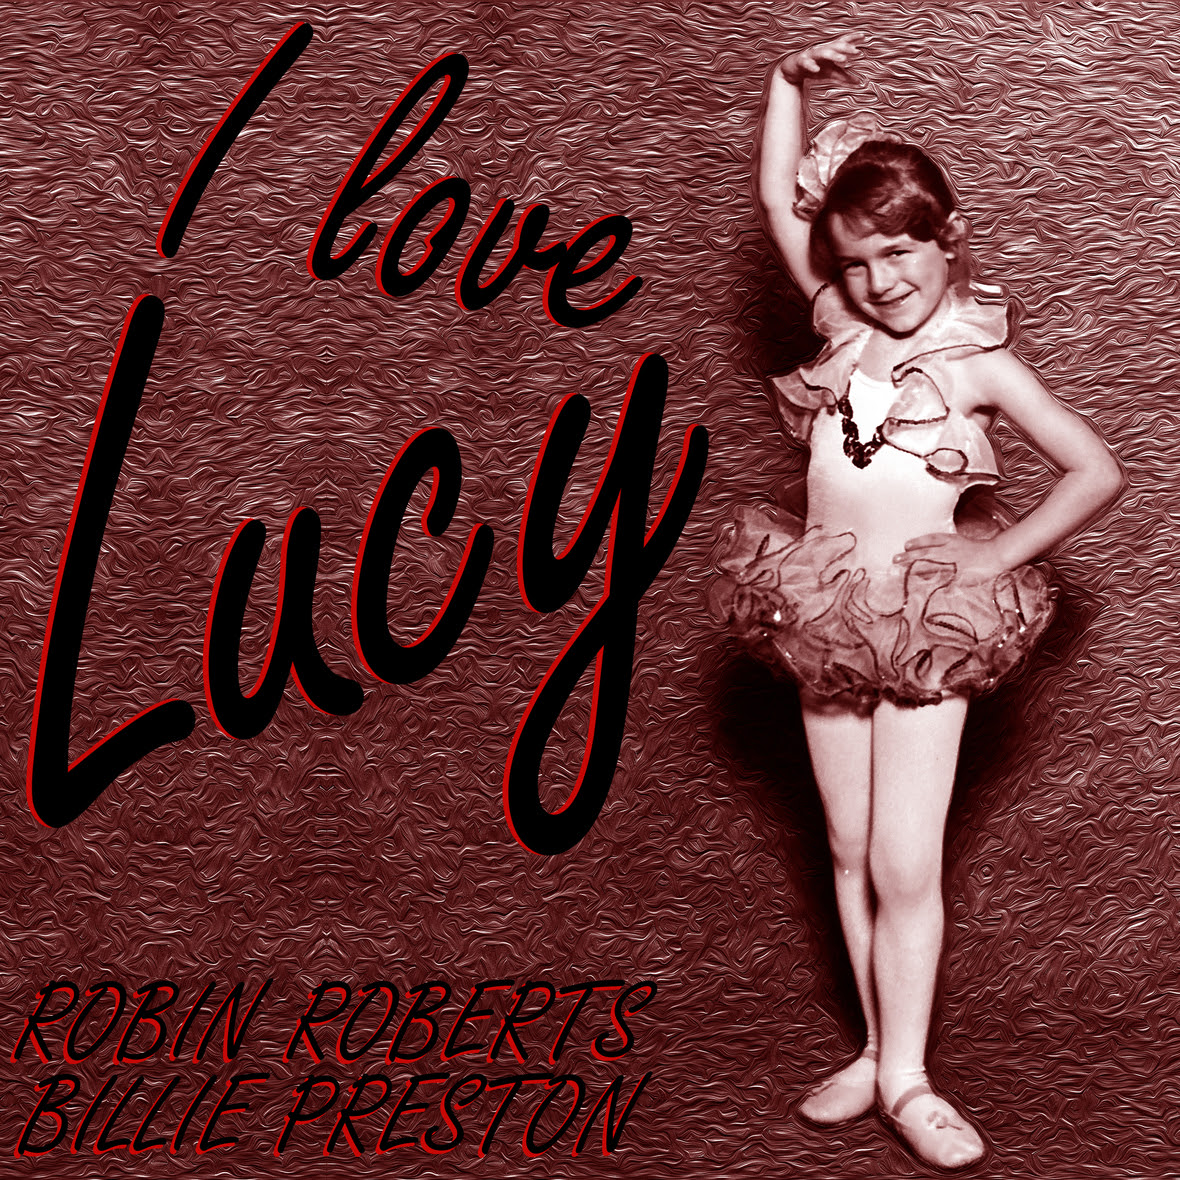 Art for I Love Lucy by Robin Roberts & Billie Preston